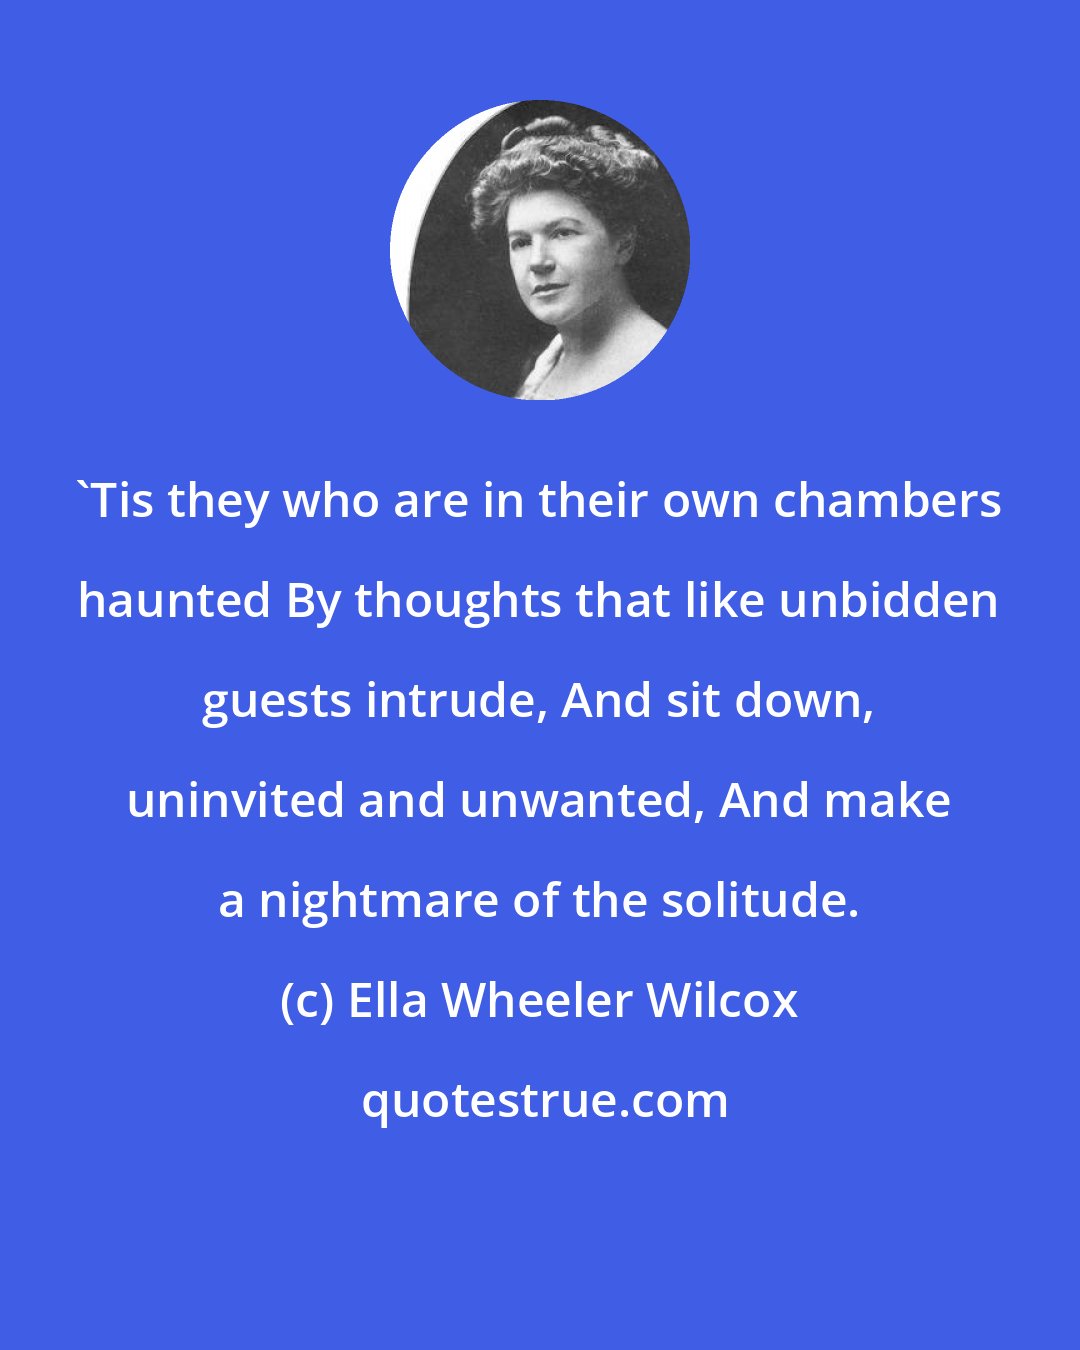 Ella Wheeler Wilcox: 'Tis they who are in their own chambers haunted By thoughts that like unbidden guests intrude, And sit down, uninvited and unwanted, And make a nightmare of the solitude.